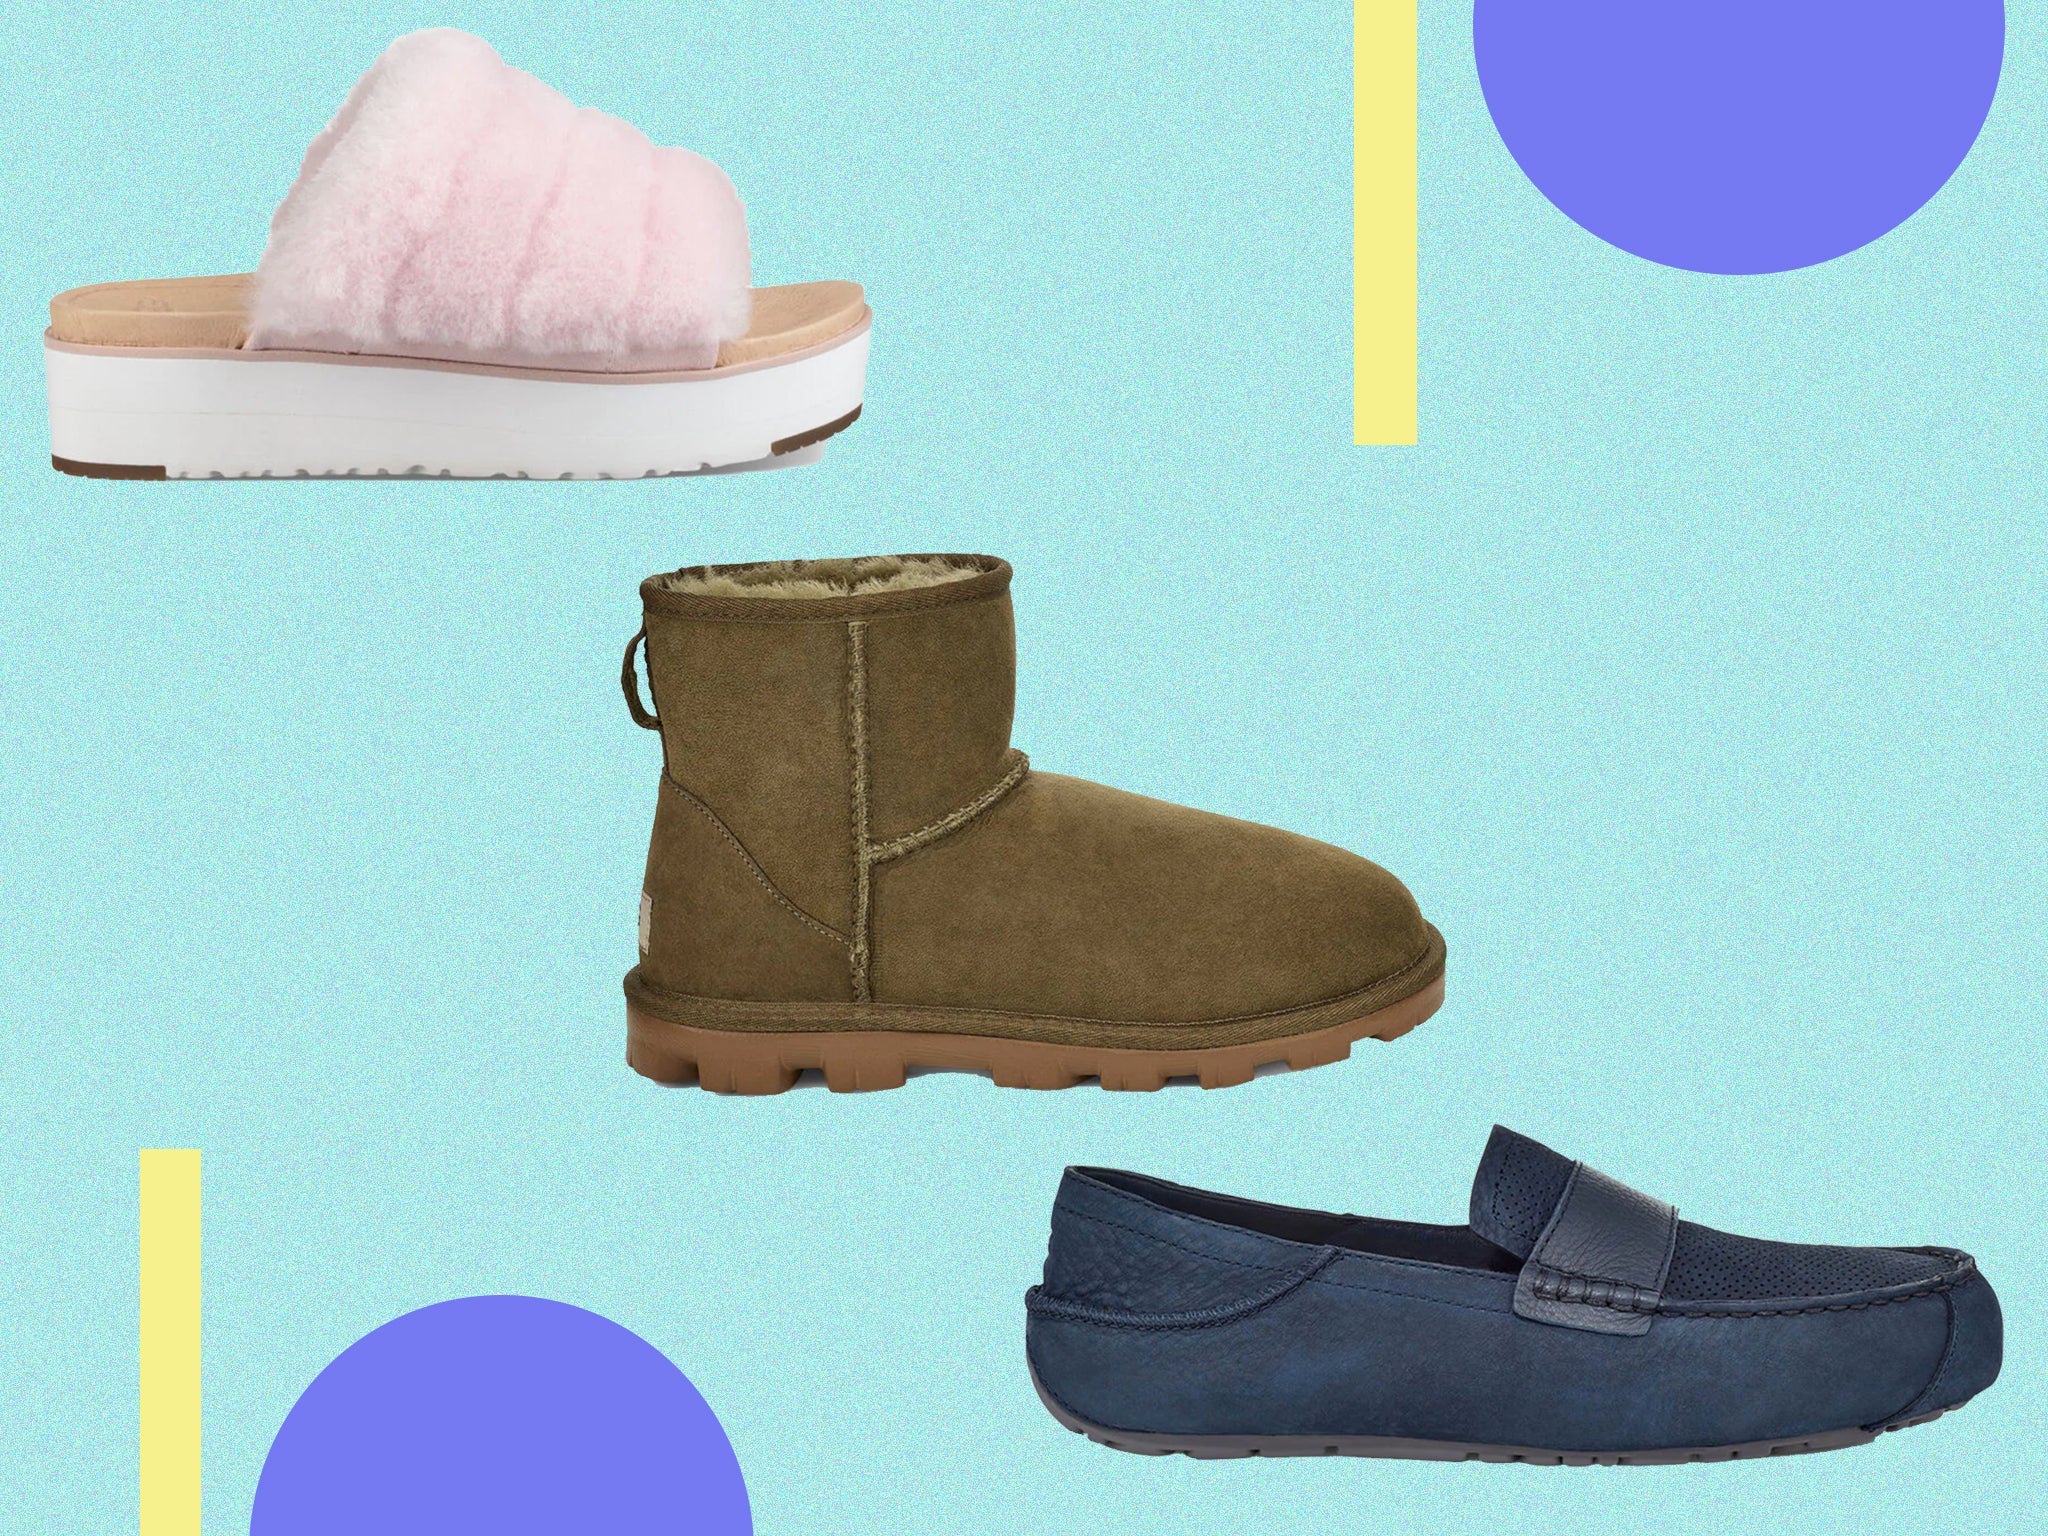 best deal on ugg slippers